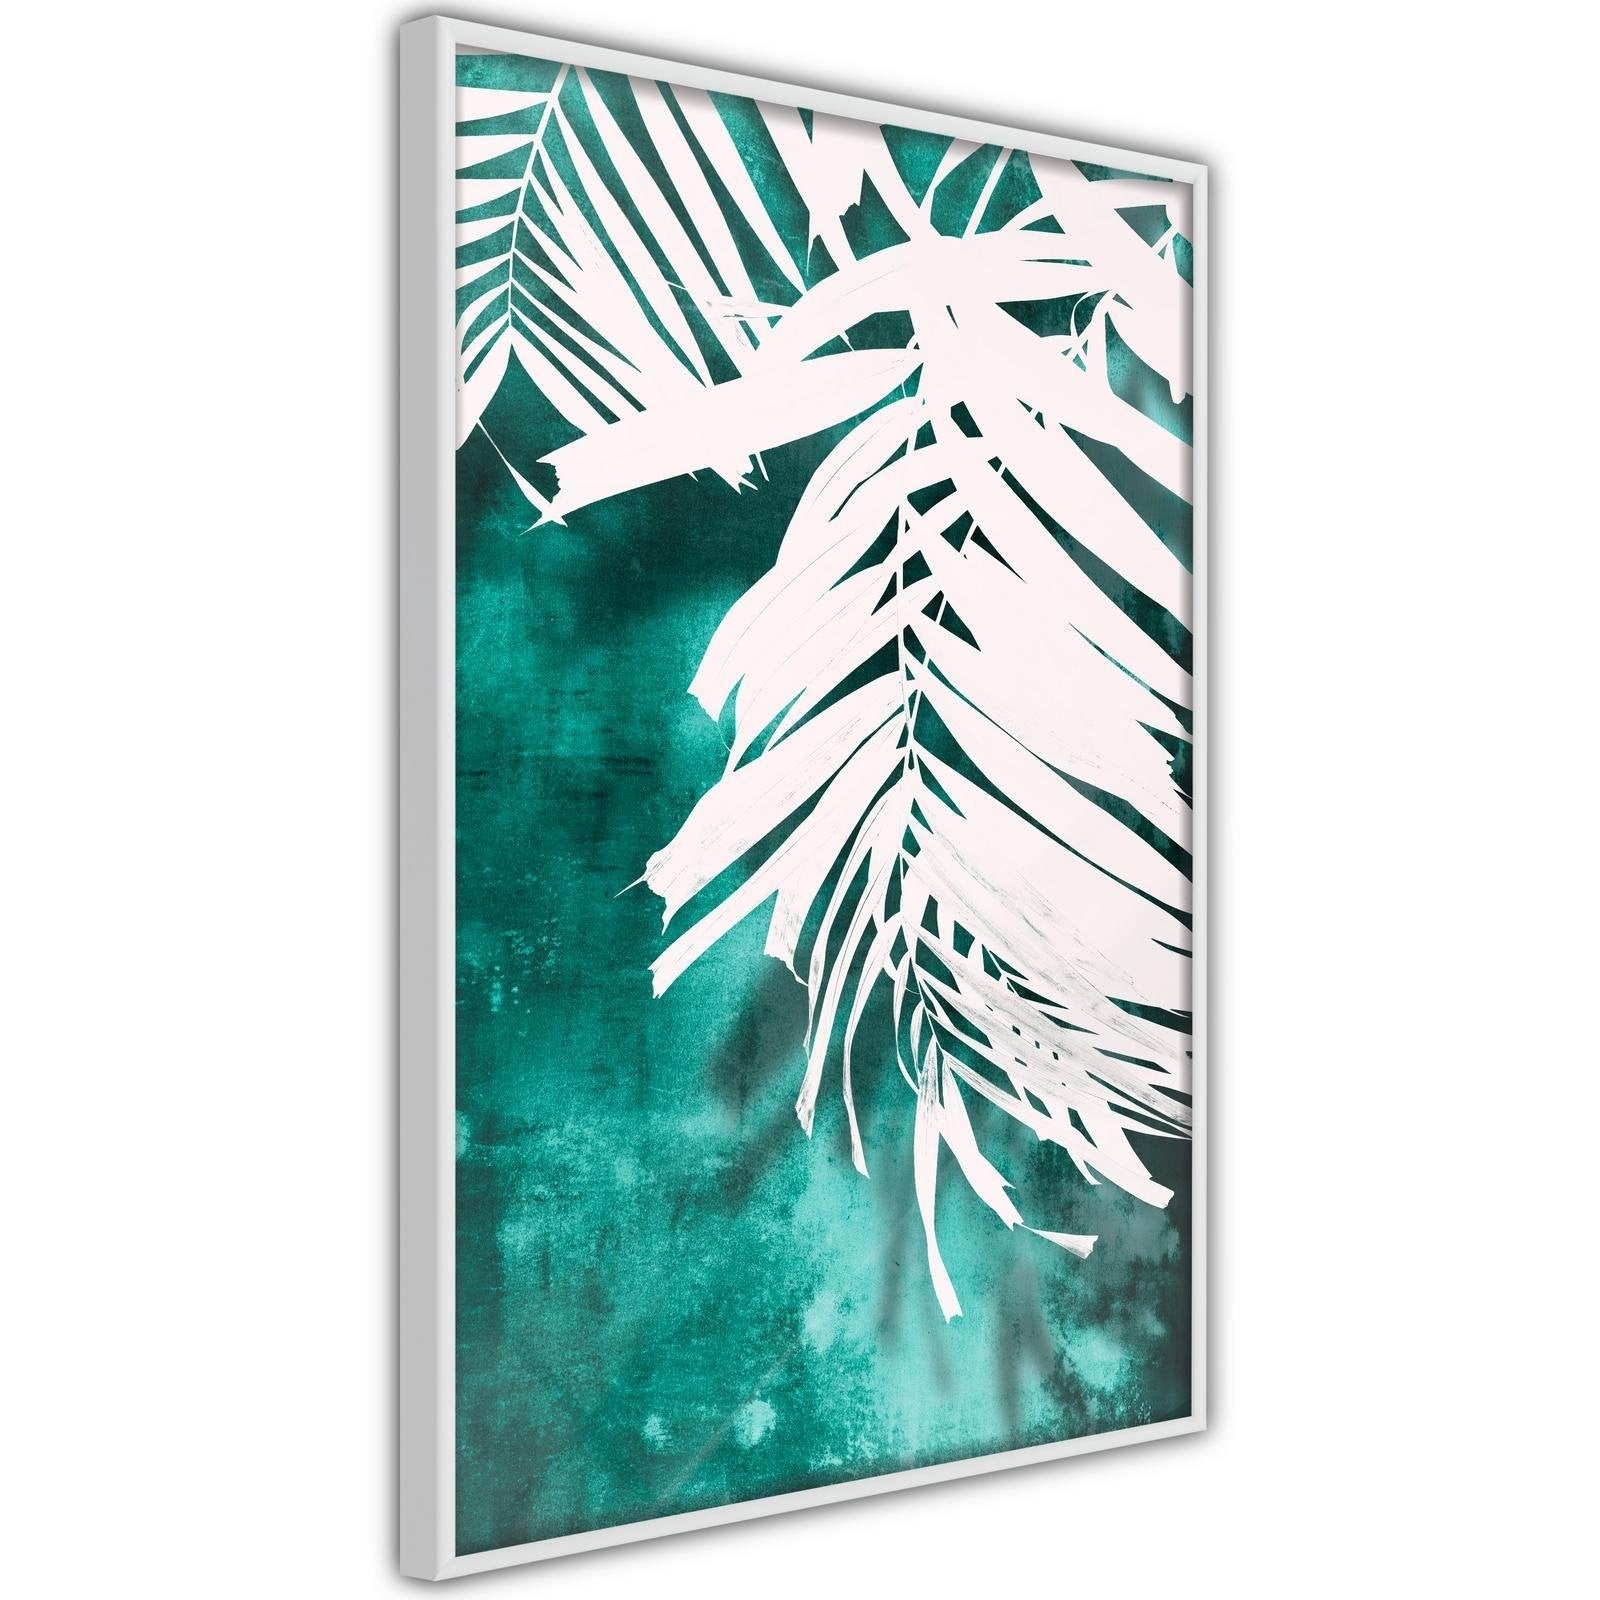 Inramad Poster / Tavla - White Palm on Teal Background-Poster Inramad-Artgeist-peaceofhome.se